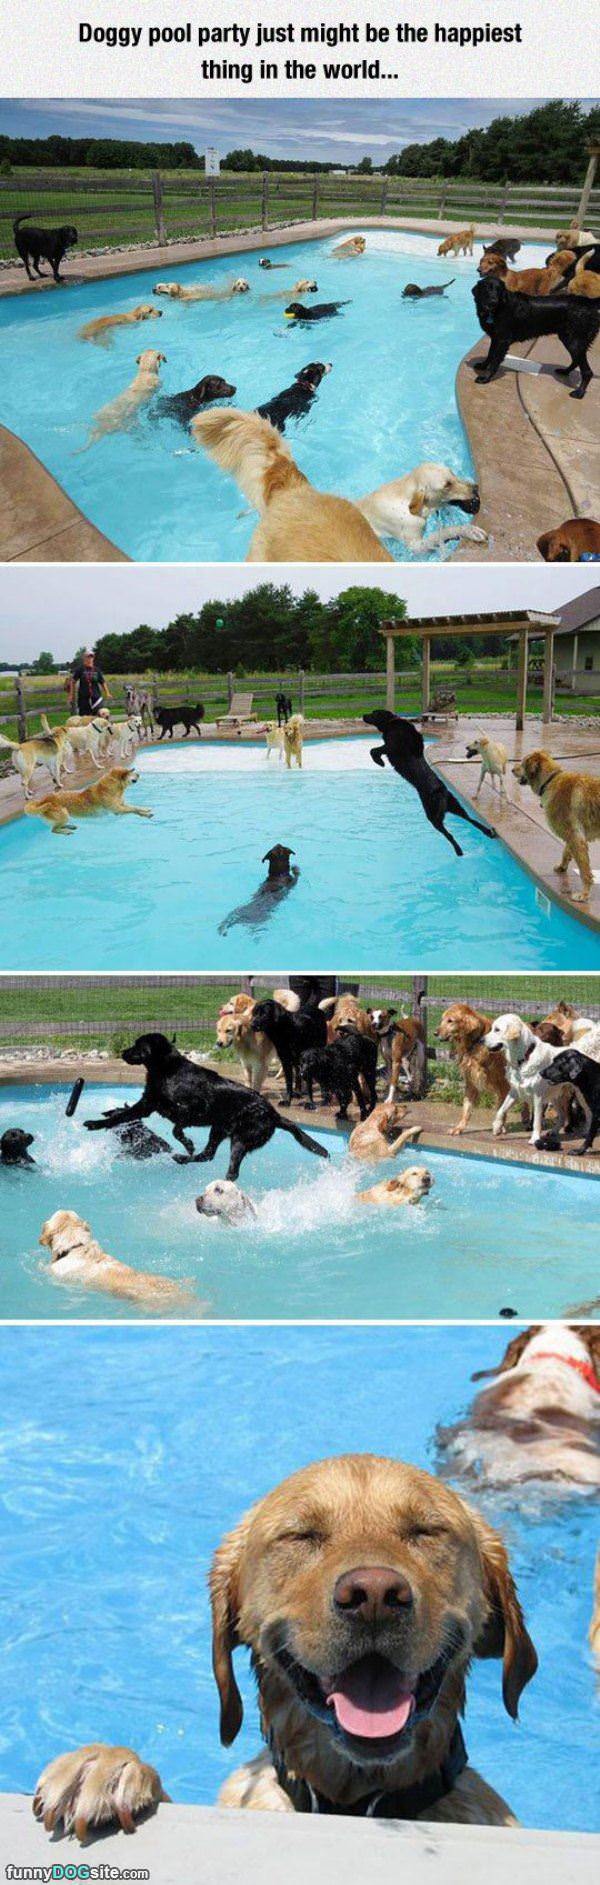 The Doggy Pool Party